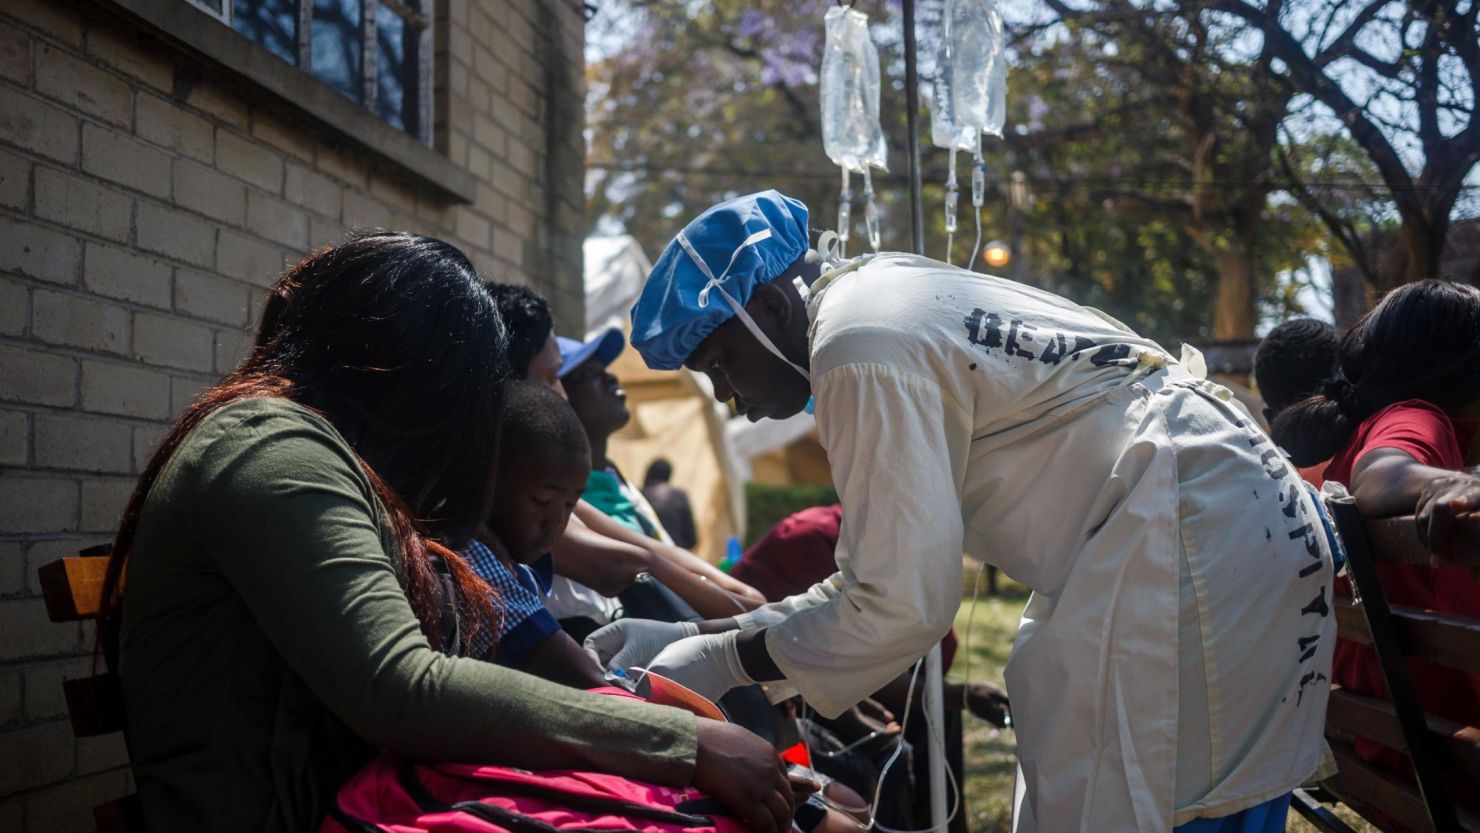 A nurse attends to patients at the cholera treatment center of the Beatrice Infectious Diseases Hospital in Harare in Zimbabwe on September 11, 2018.